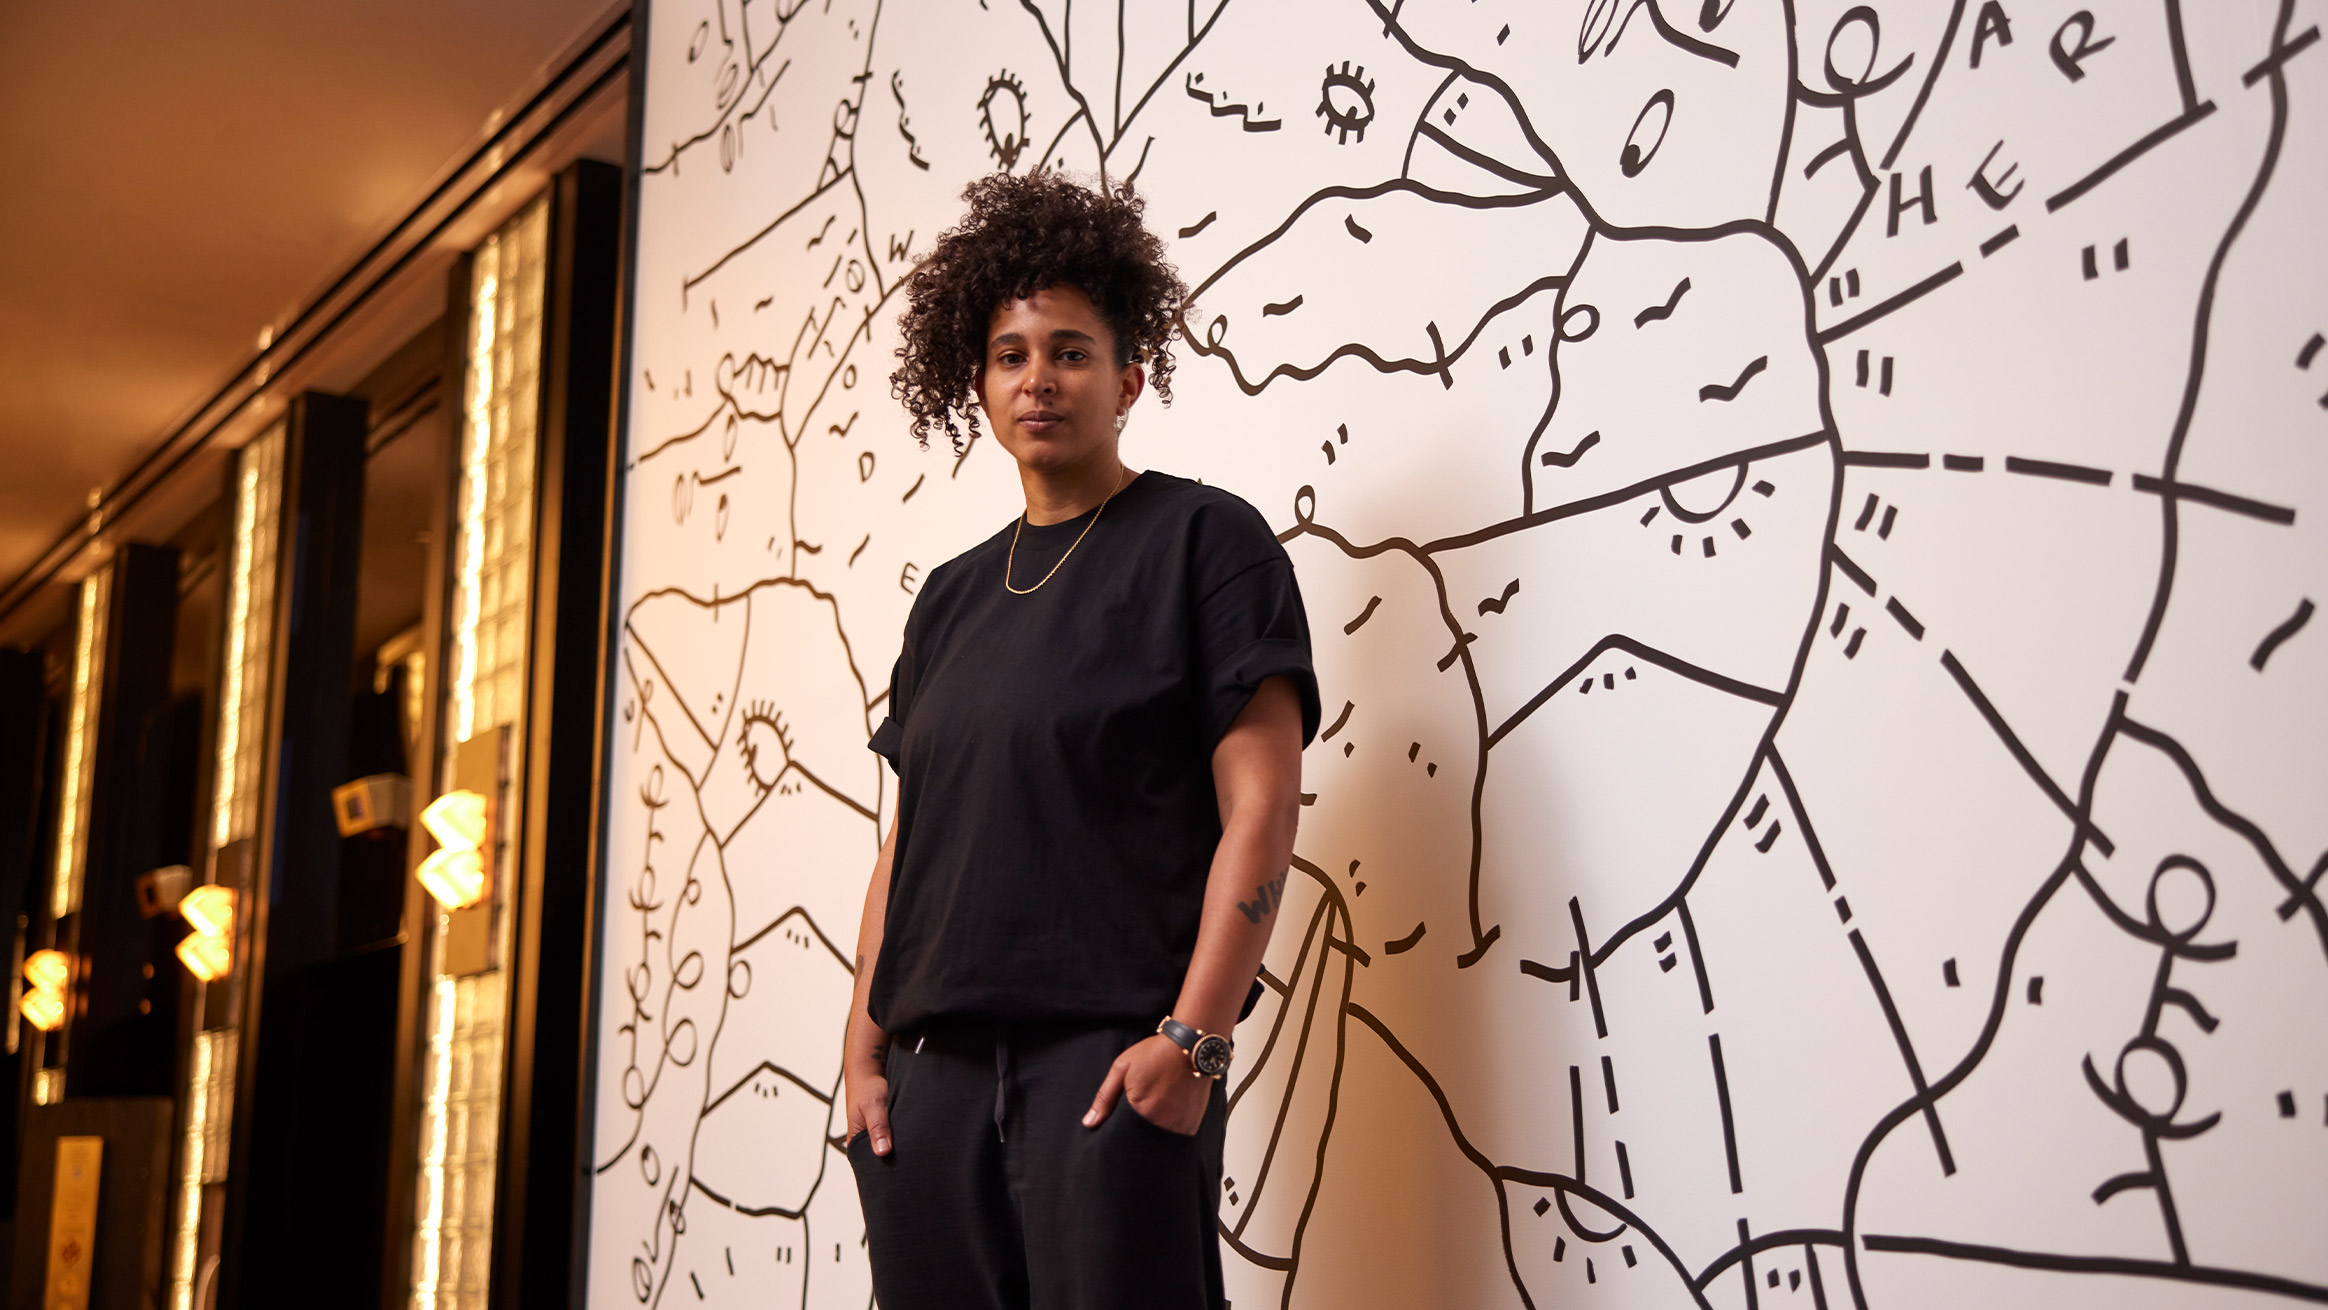 A woman with curly hair stands confidently in front of a wall with a black and white abstract doodle. she wears a black t-shirt and jeans, looking directly at the camera.